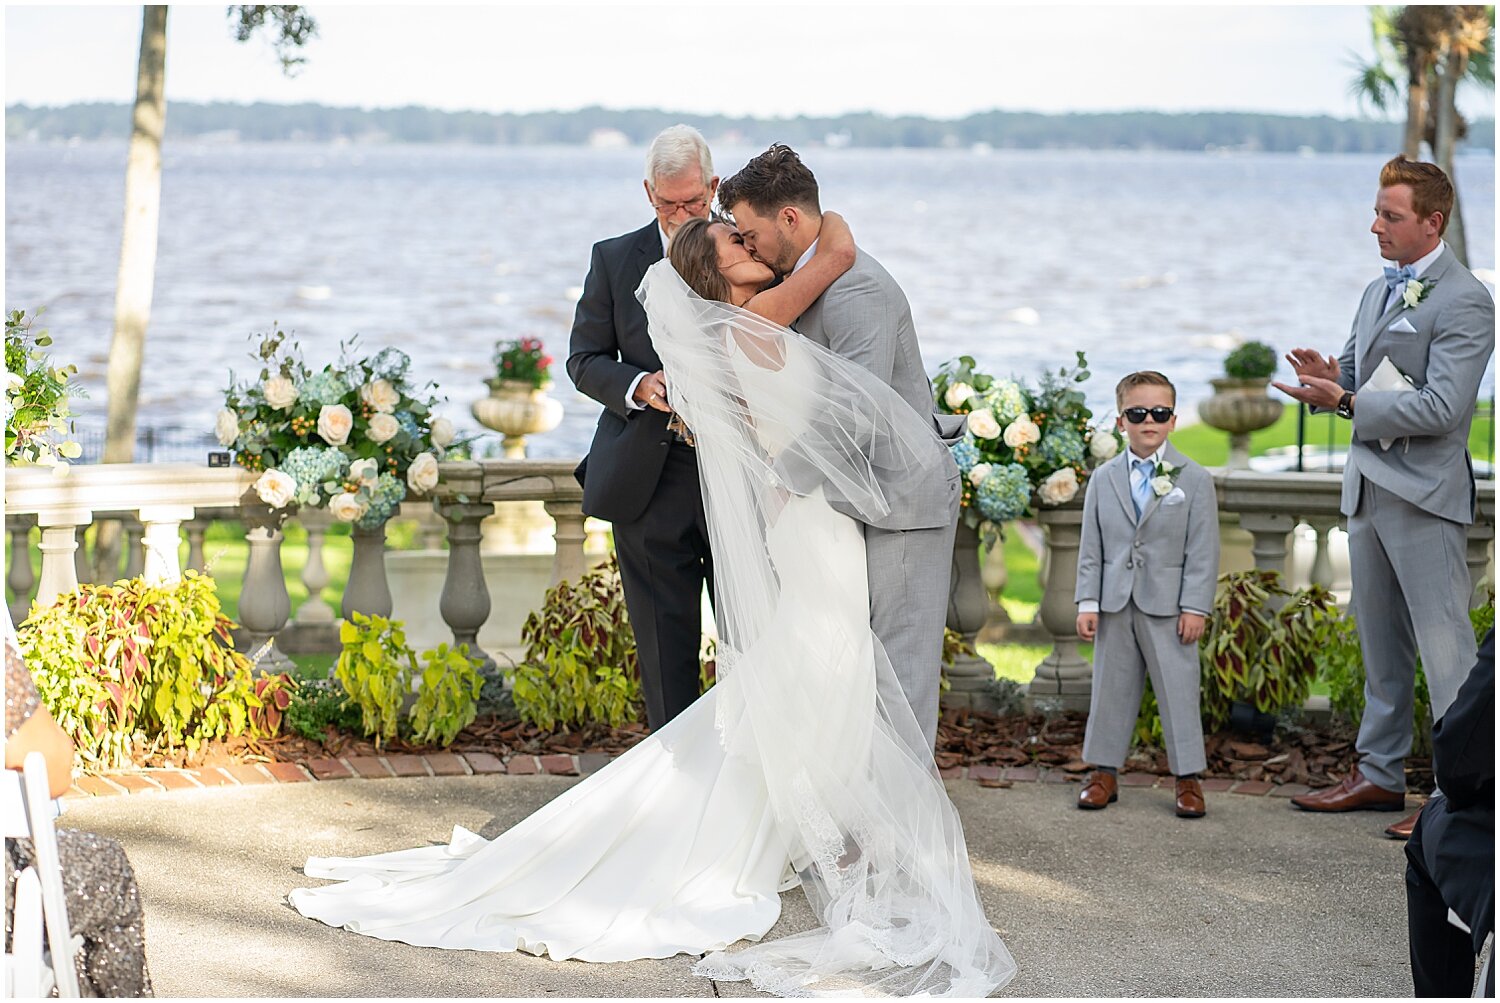  bride and groom kiss during wedding ceremony 